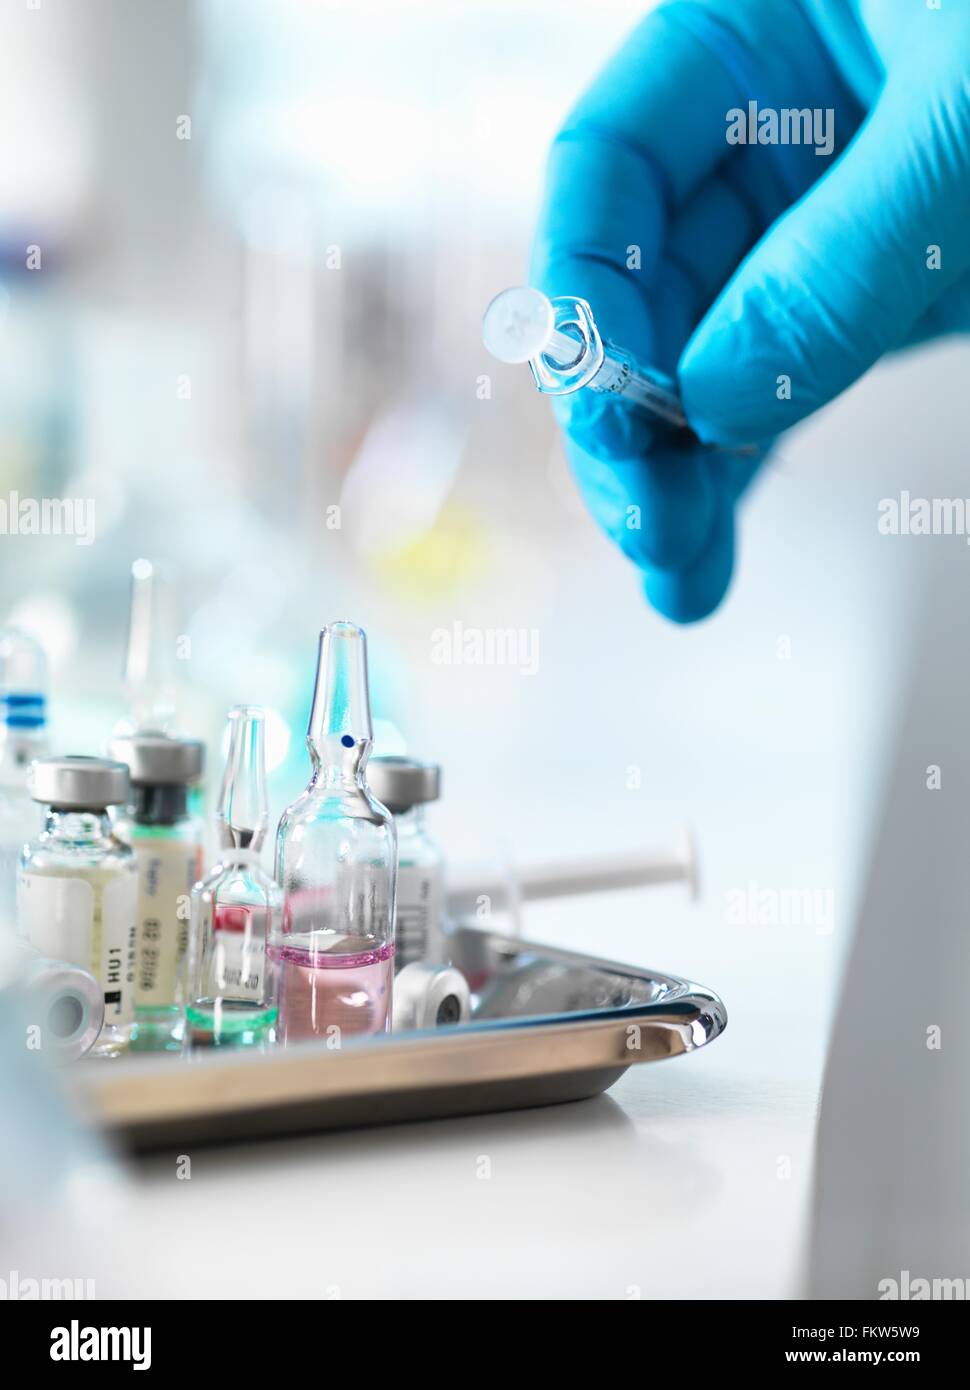 Doctor placing syringe back onto tray with drug vials Stock Photo